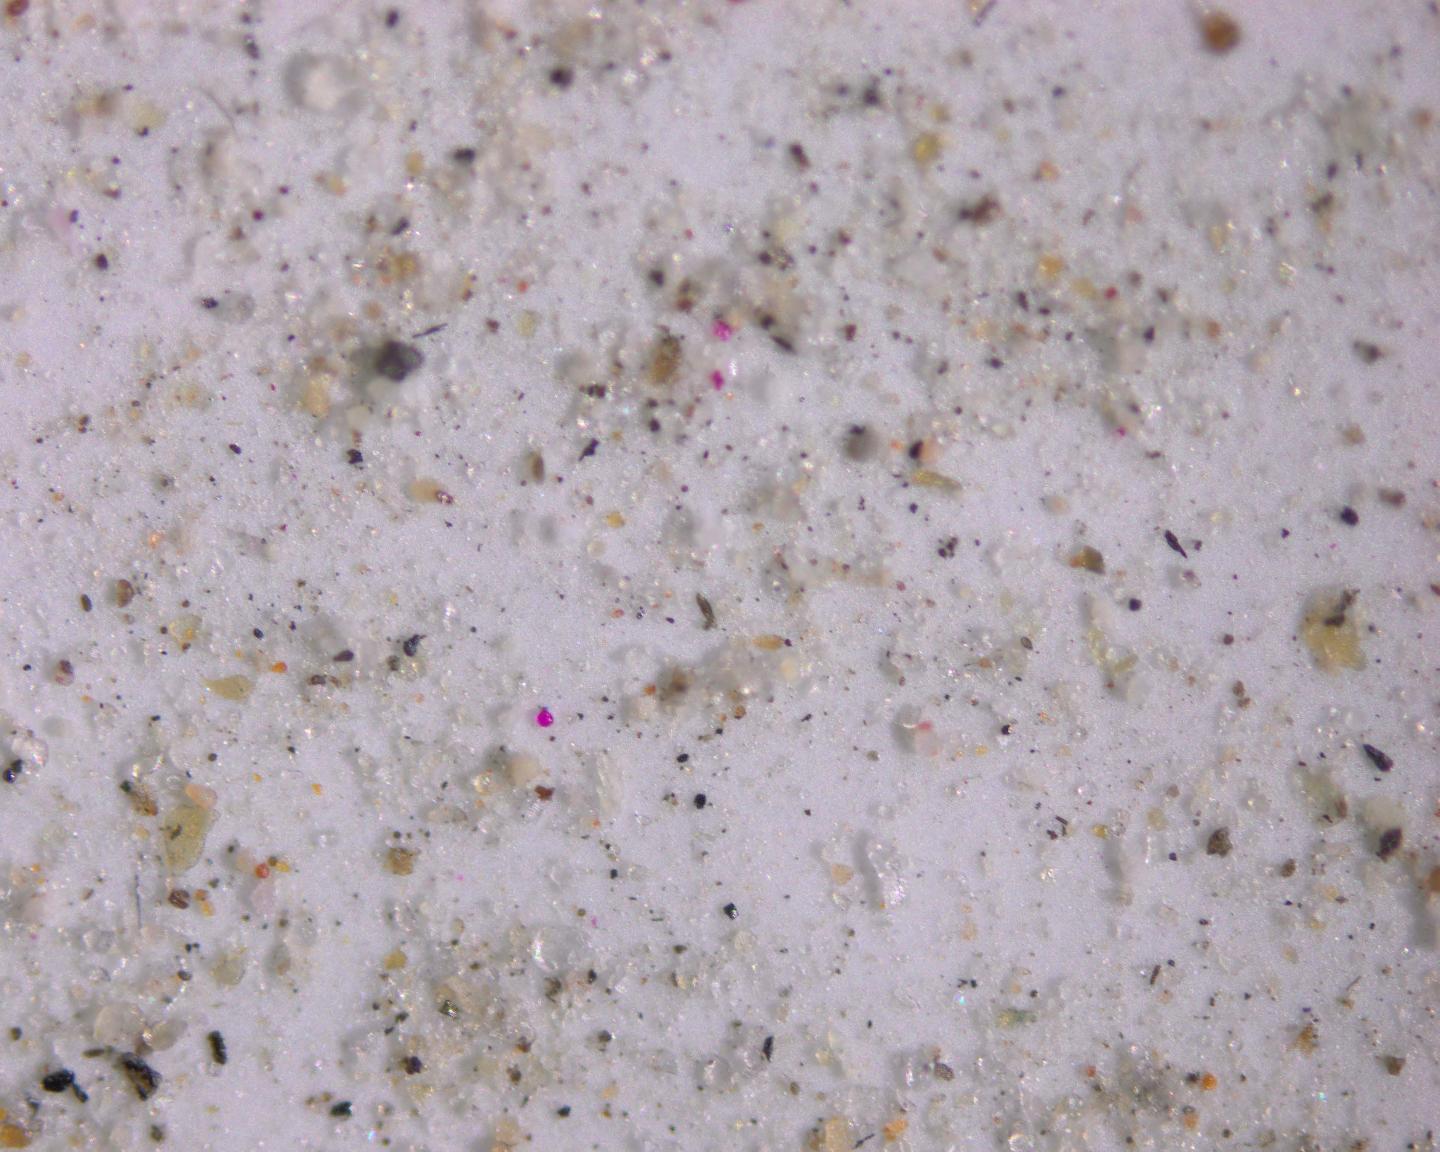 Microplastic particles in atmospheric dust.